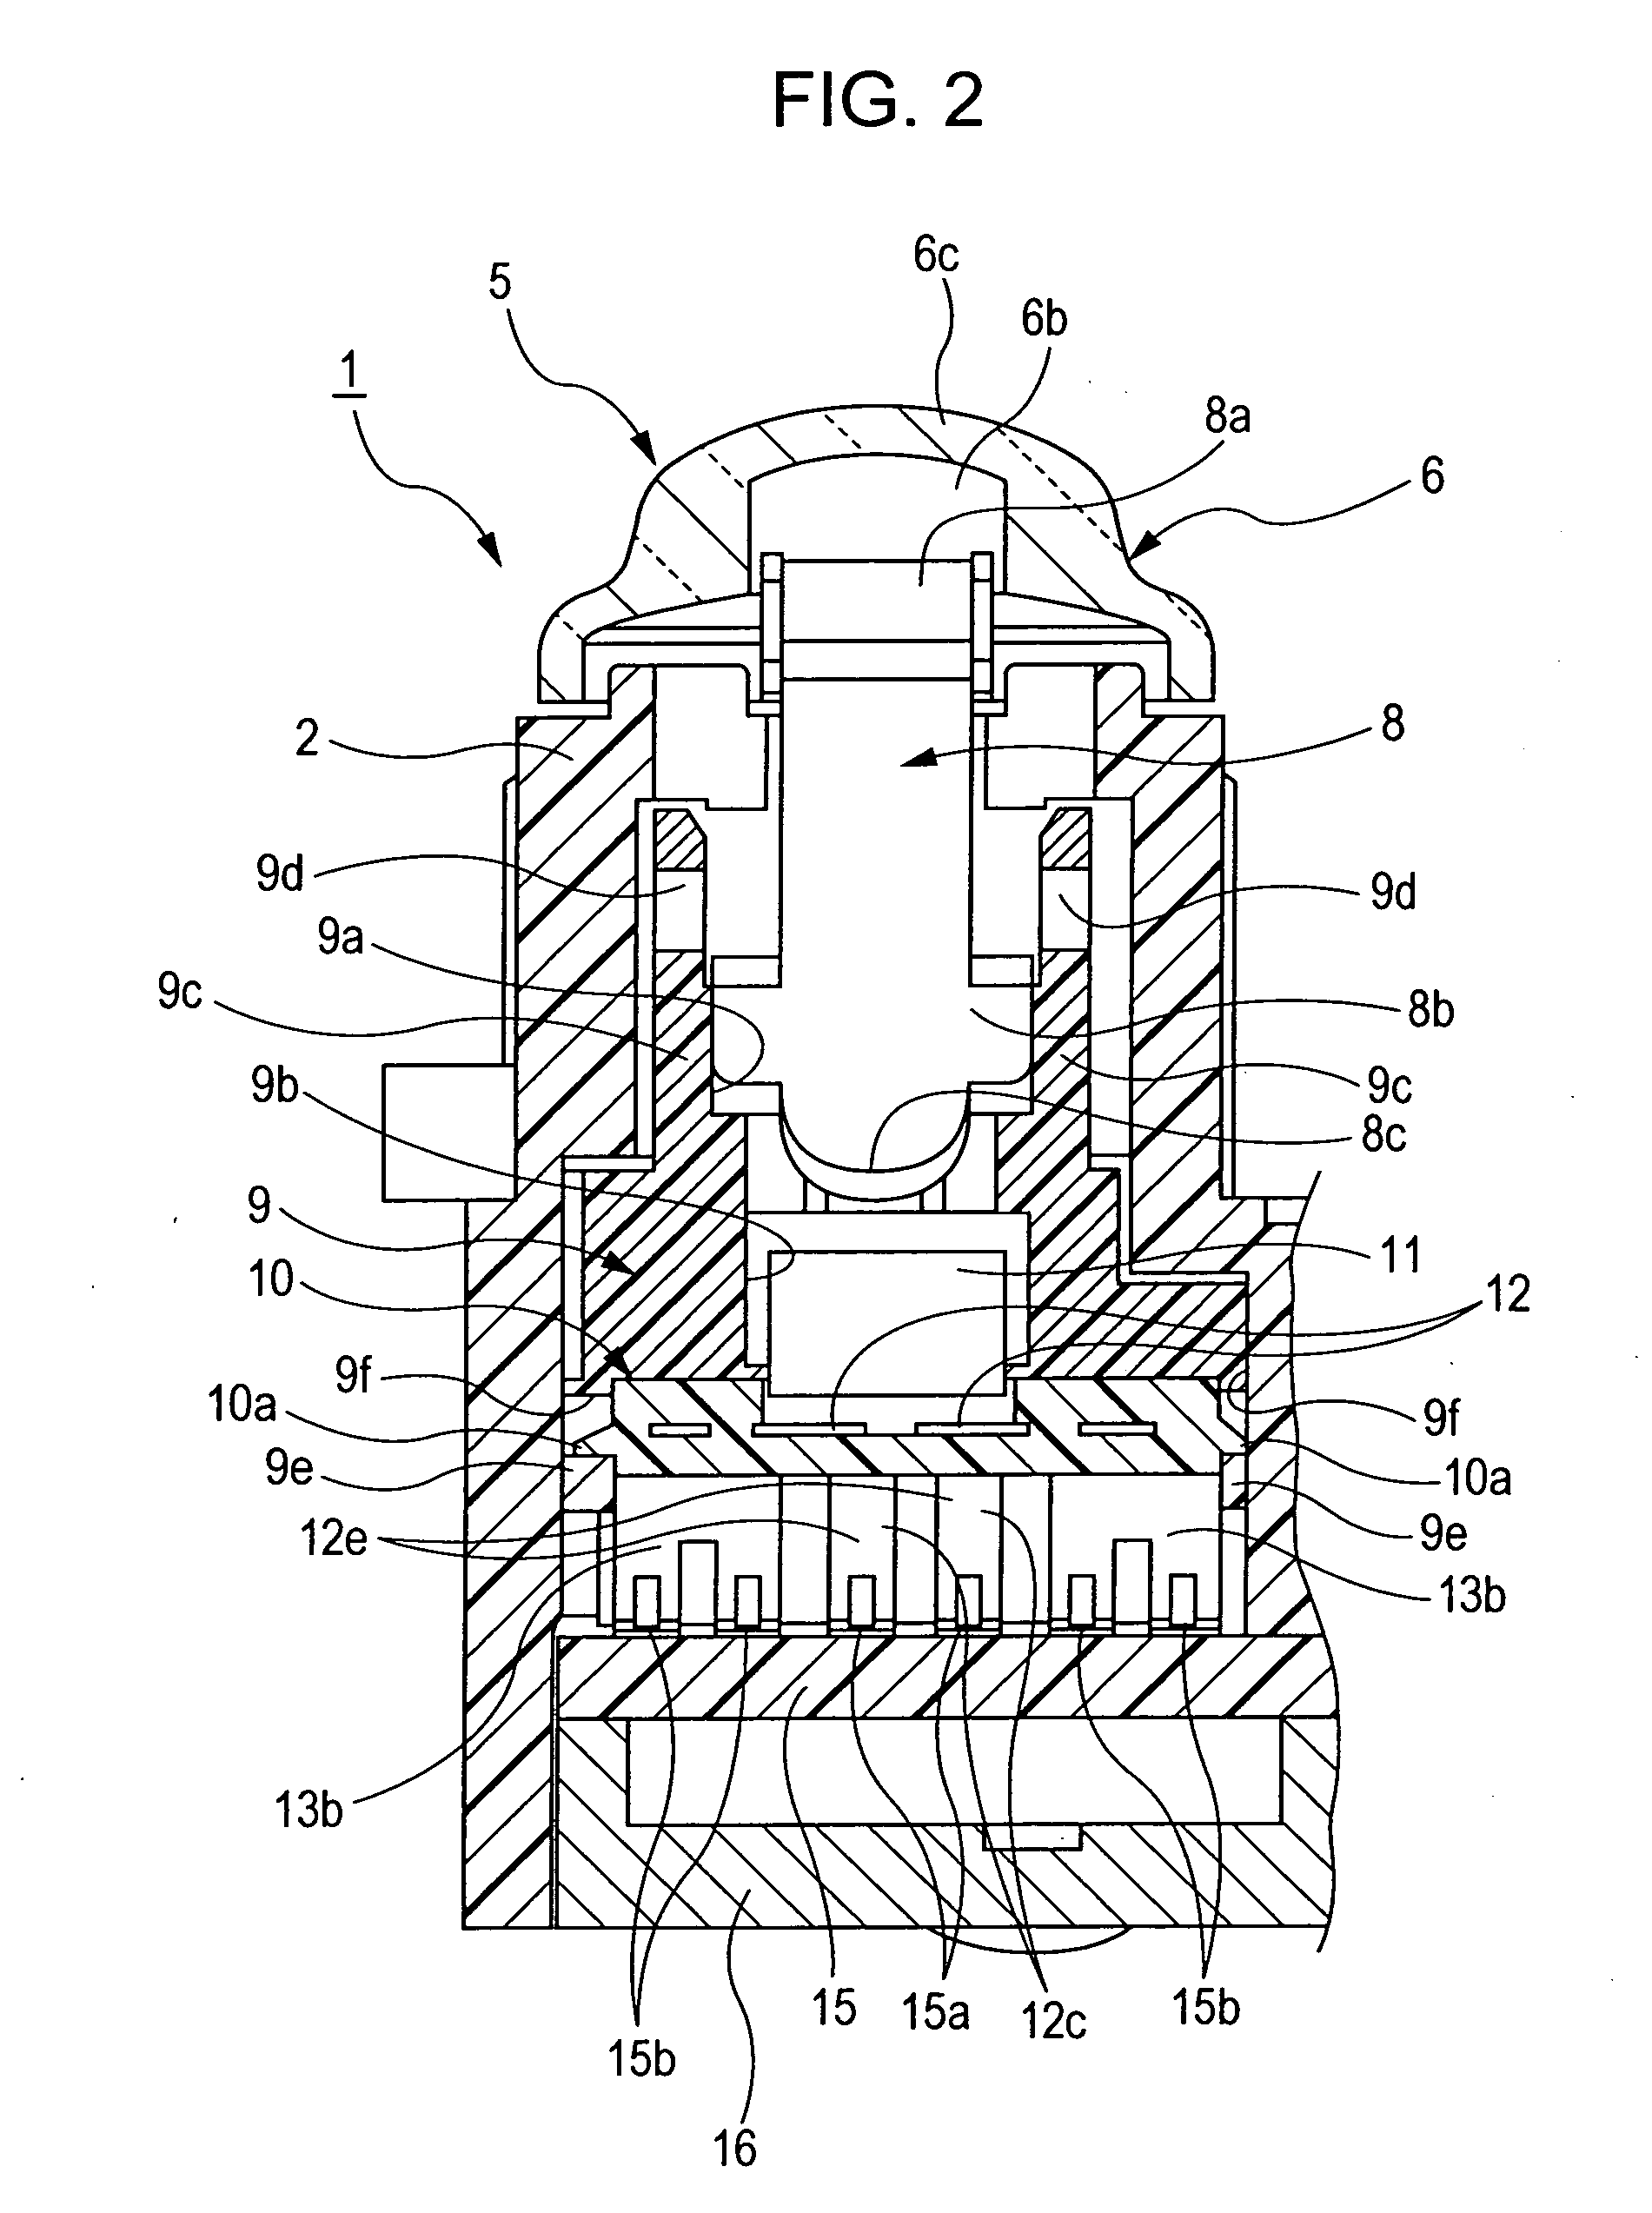 Electric part with illumination having an illuminating member movable integrally with an operating member and being superior in assembleability